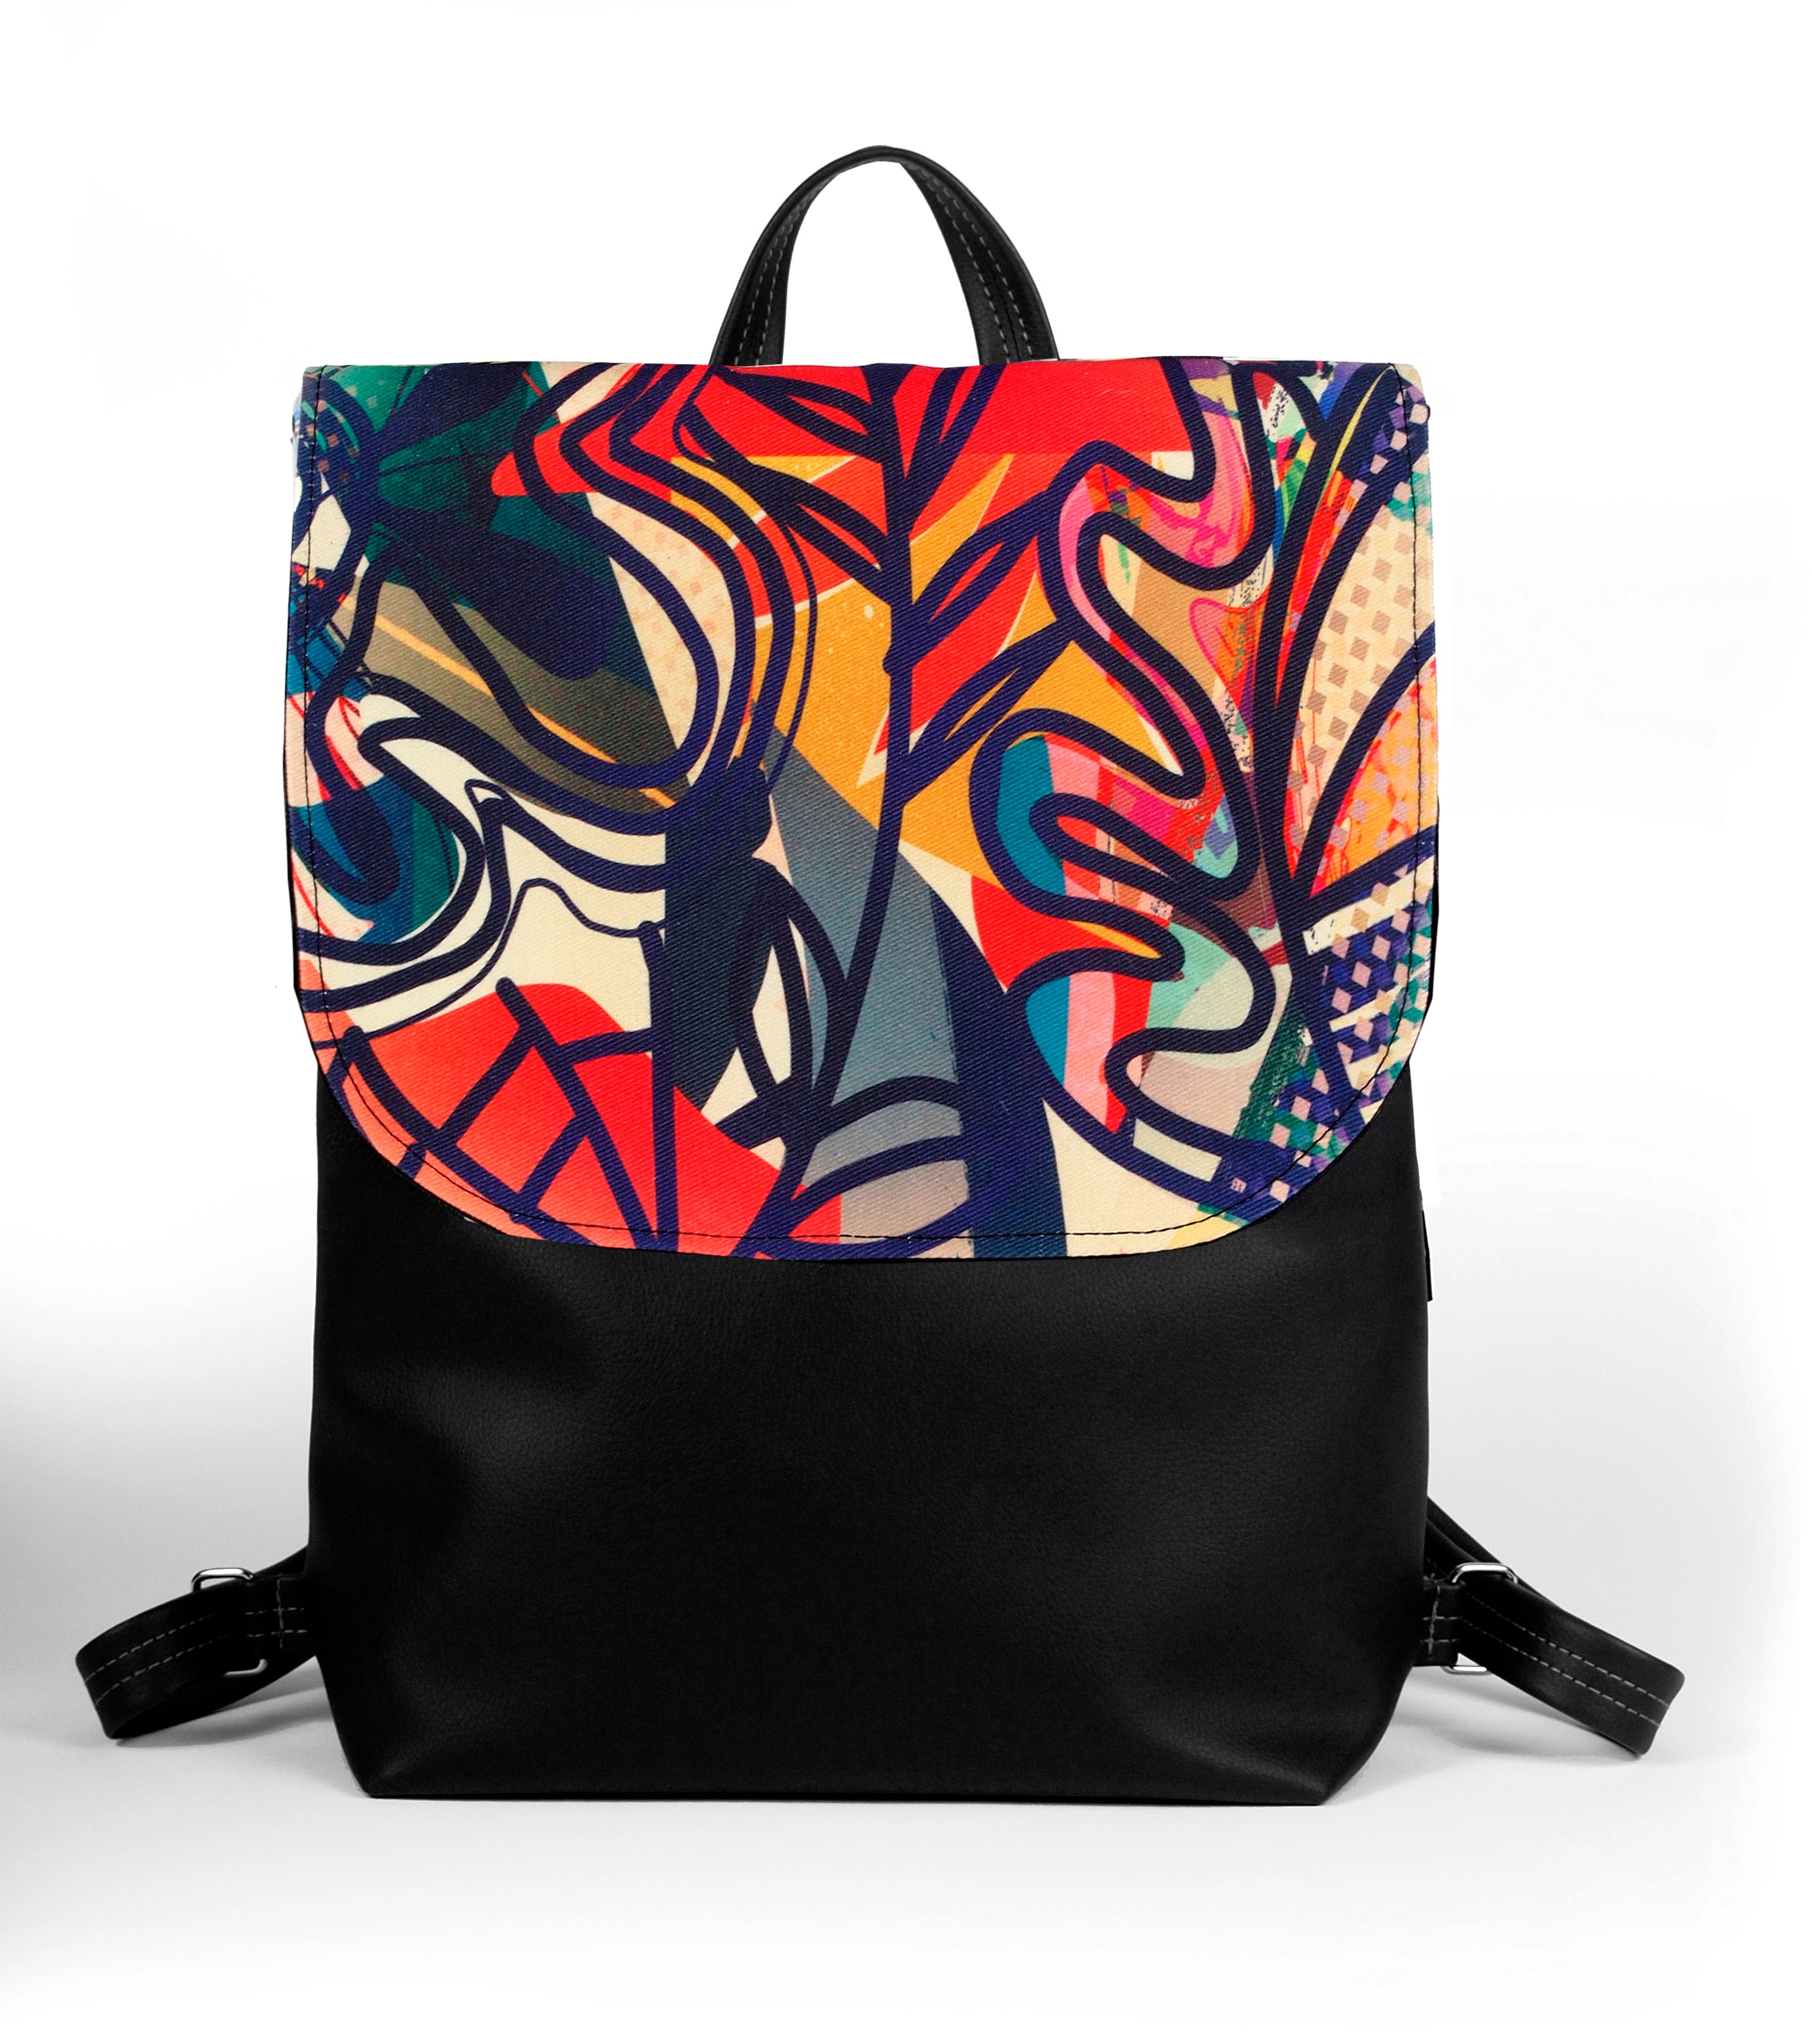 Bardo backpack large - Summer abstraction - Premium backpack large from BARDO ART WORKS - Just lvdark green, flowers, forest, gift, handemade, lotos, nature, painted patterns, red, tablet, urban style, vegan leather, woman89.00! Shop now at BARDO ART WORKS